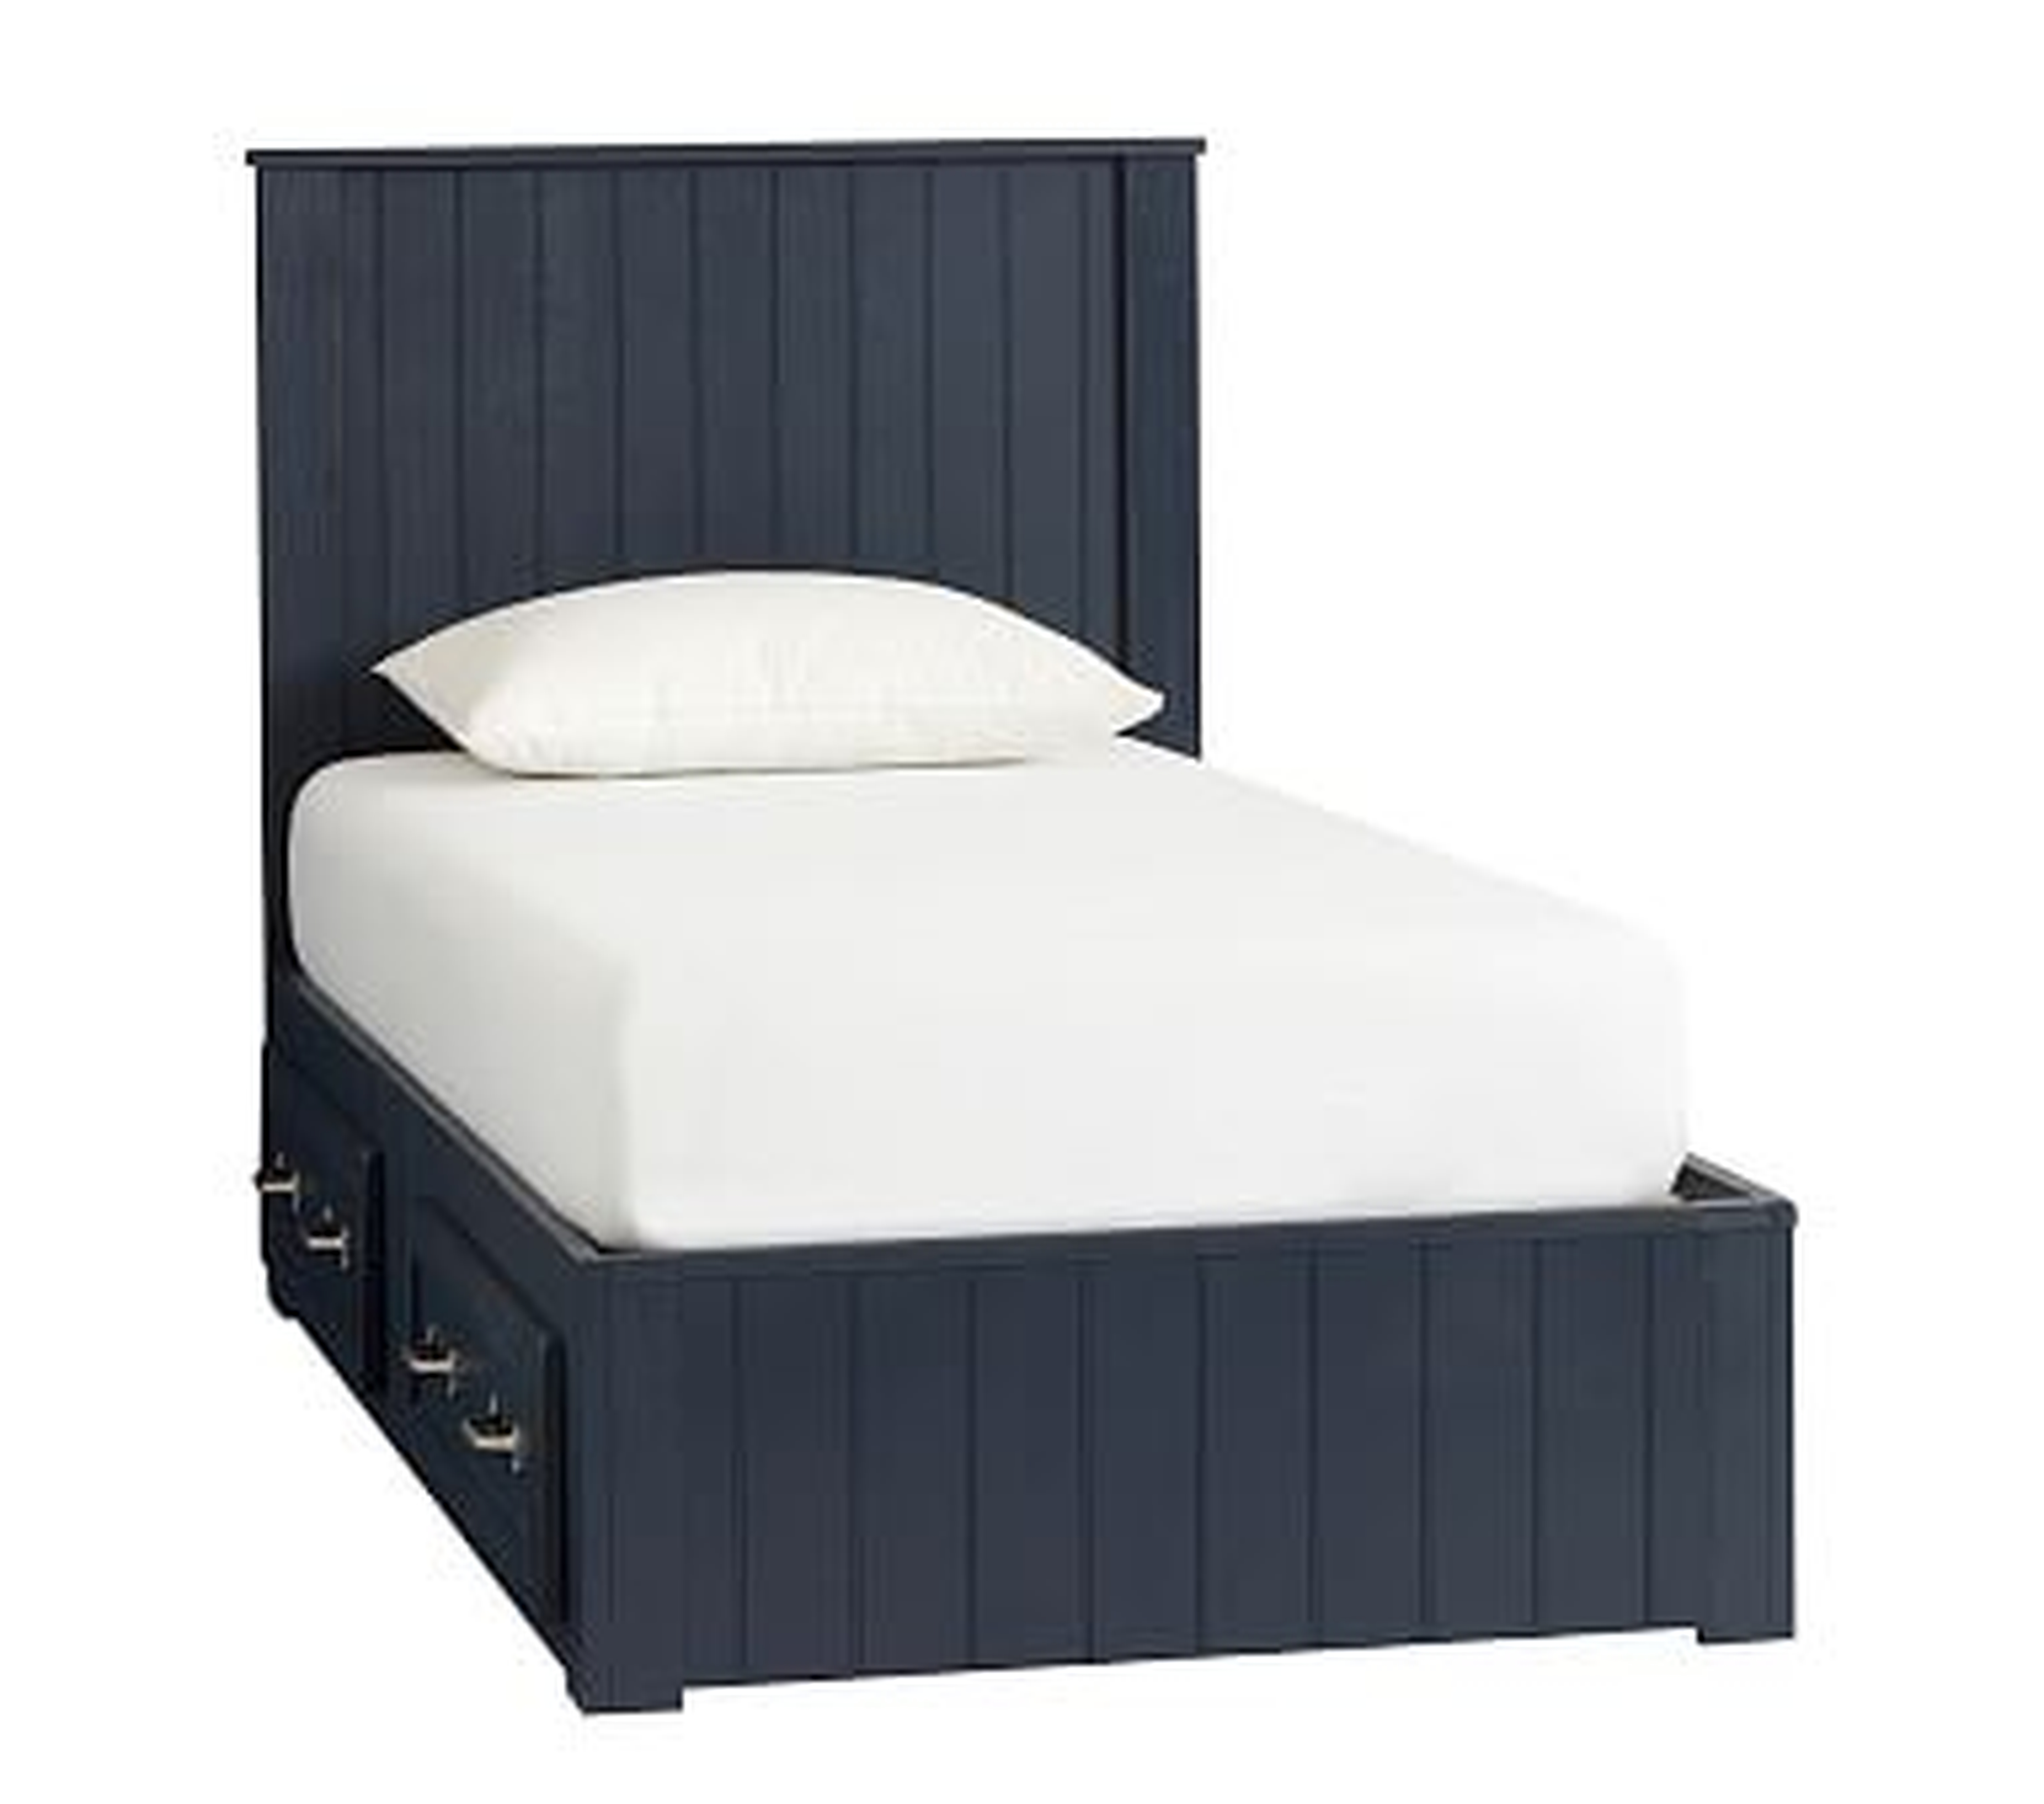 Belden Bed with Headboard, Twin, Weathered Navy, Flat Rate - Pottery Barn Kids